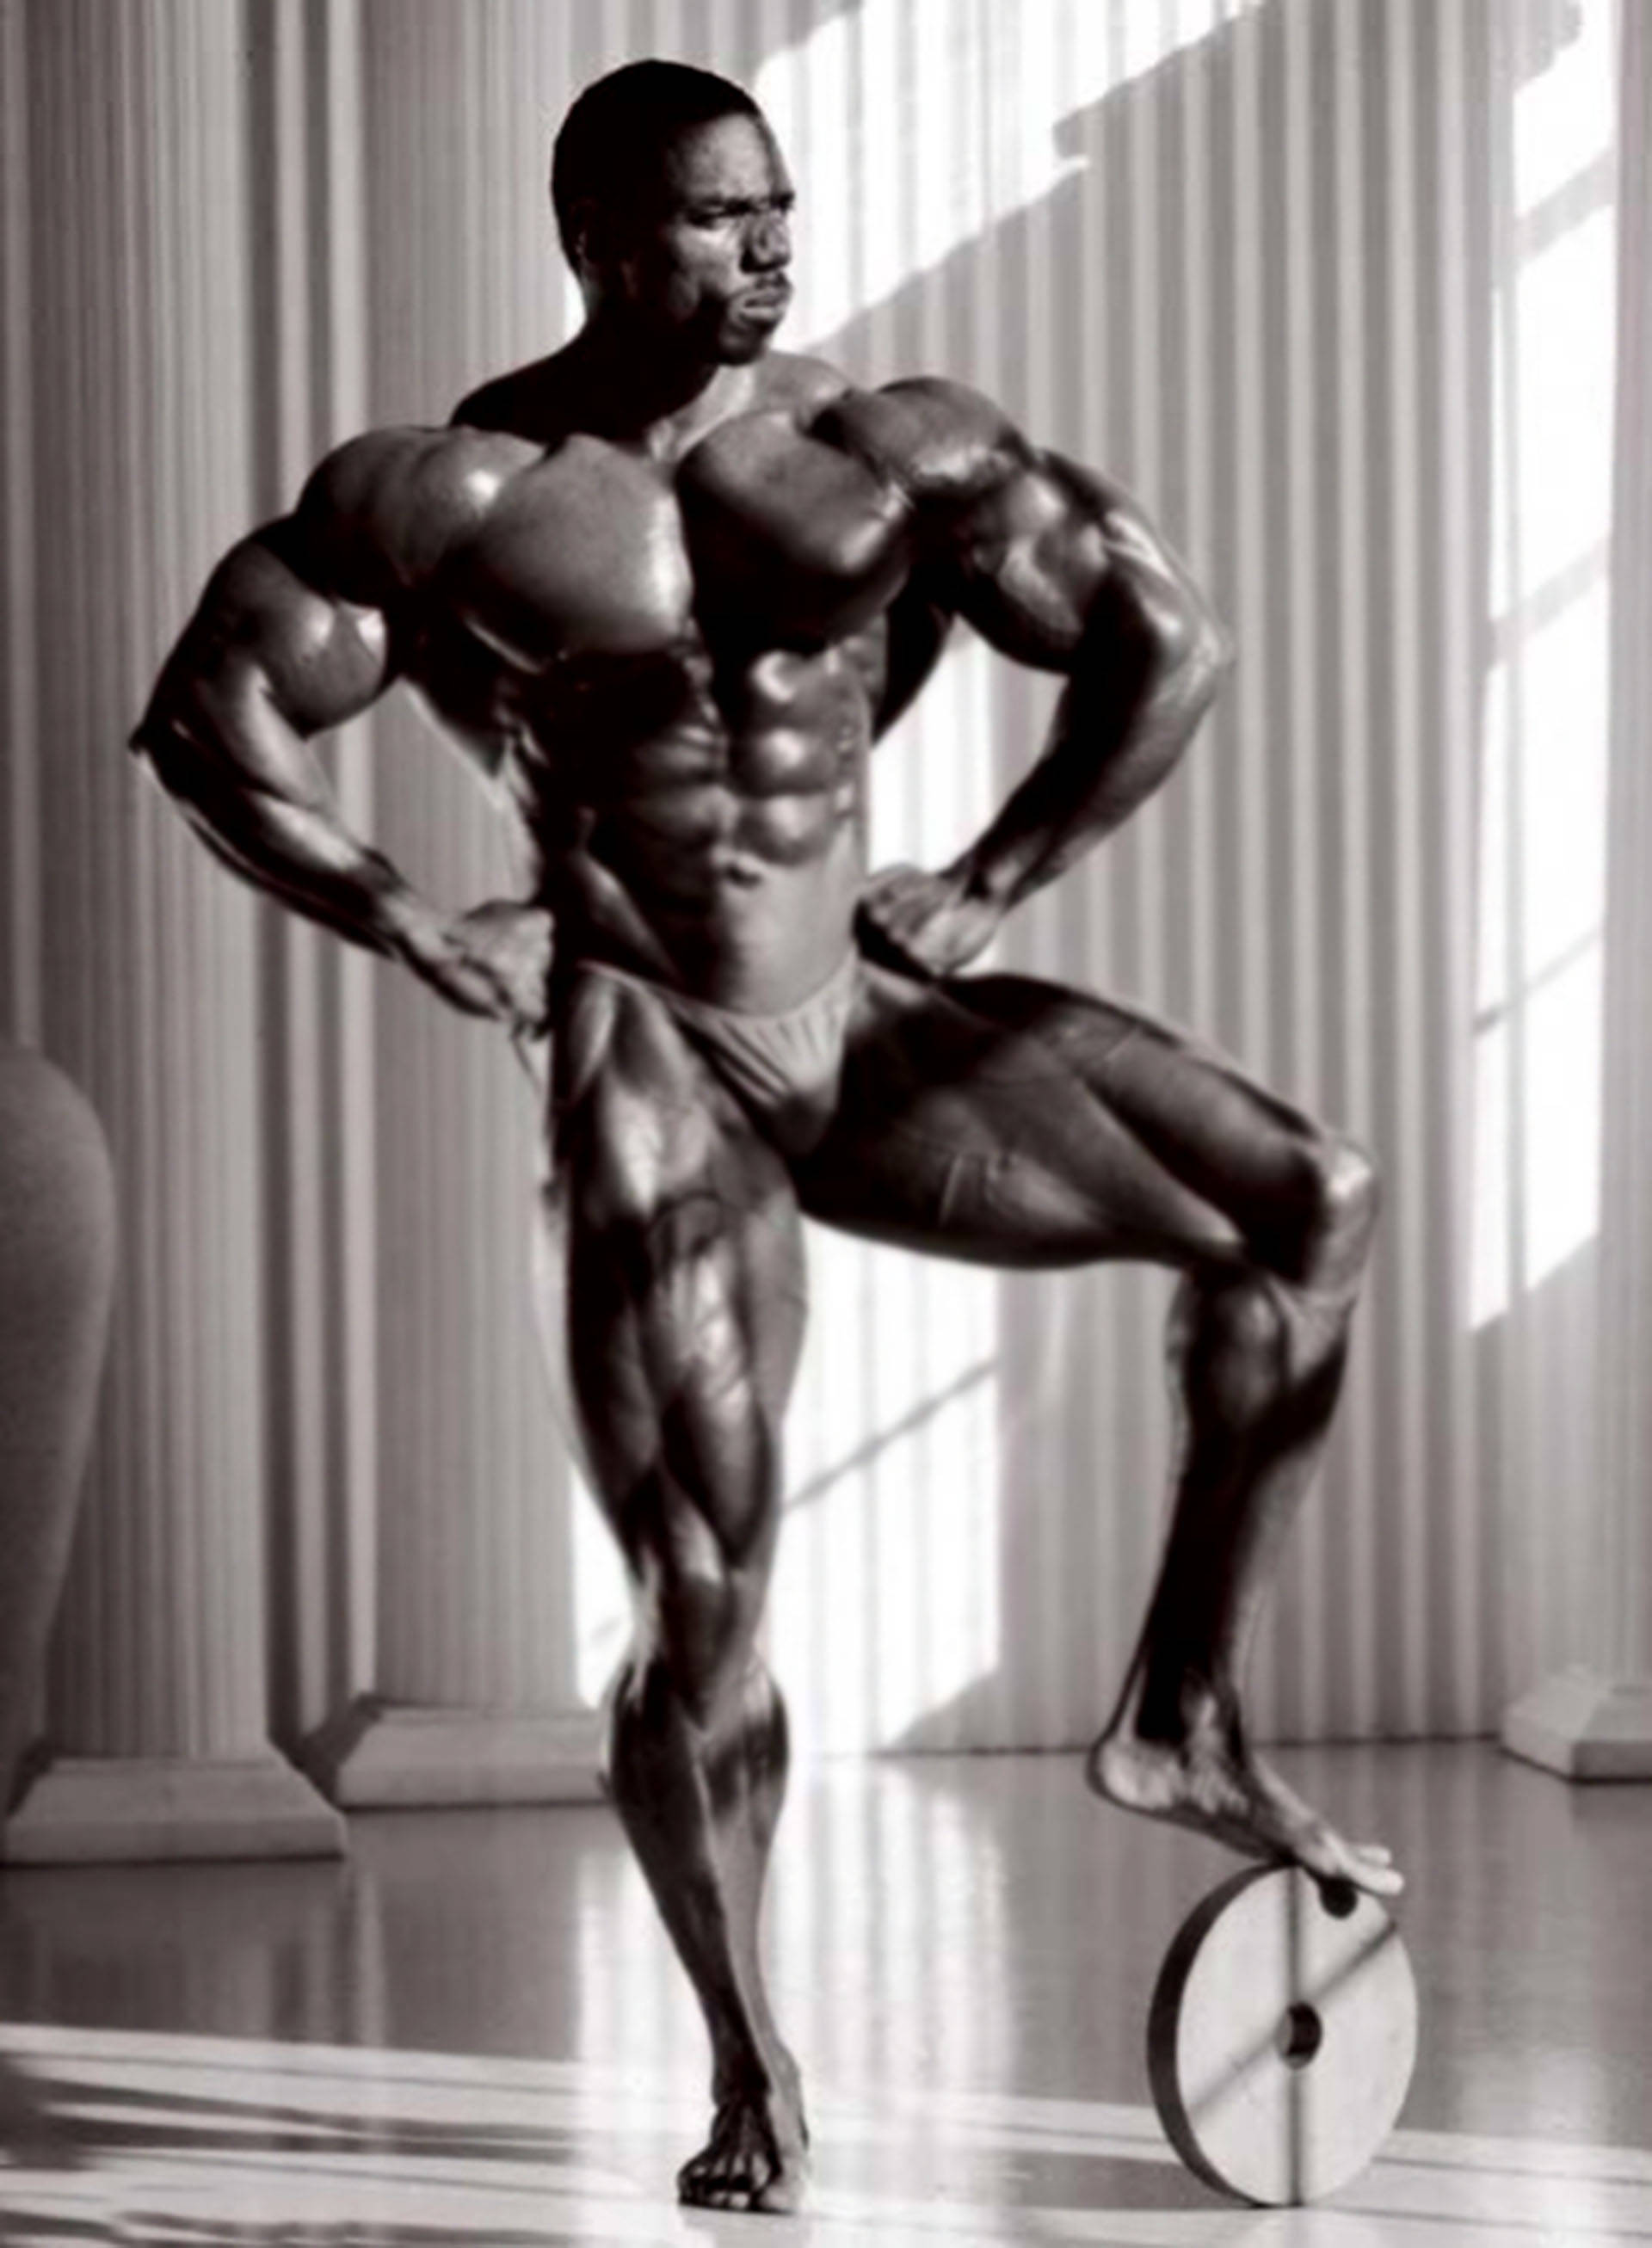 Herculeanflex Wheeler Is A Professional Bodybuilder And Fitness Icon Known For His Incredible Muscular Physique And Strength. With This Computer Or Mobile Wallpaper, You Can Showcase His Legendary Figure And Be Inspired To Reach Your Own Fitness Goals. Fondo de pantalla